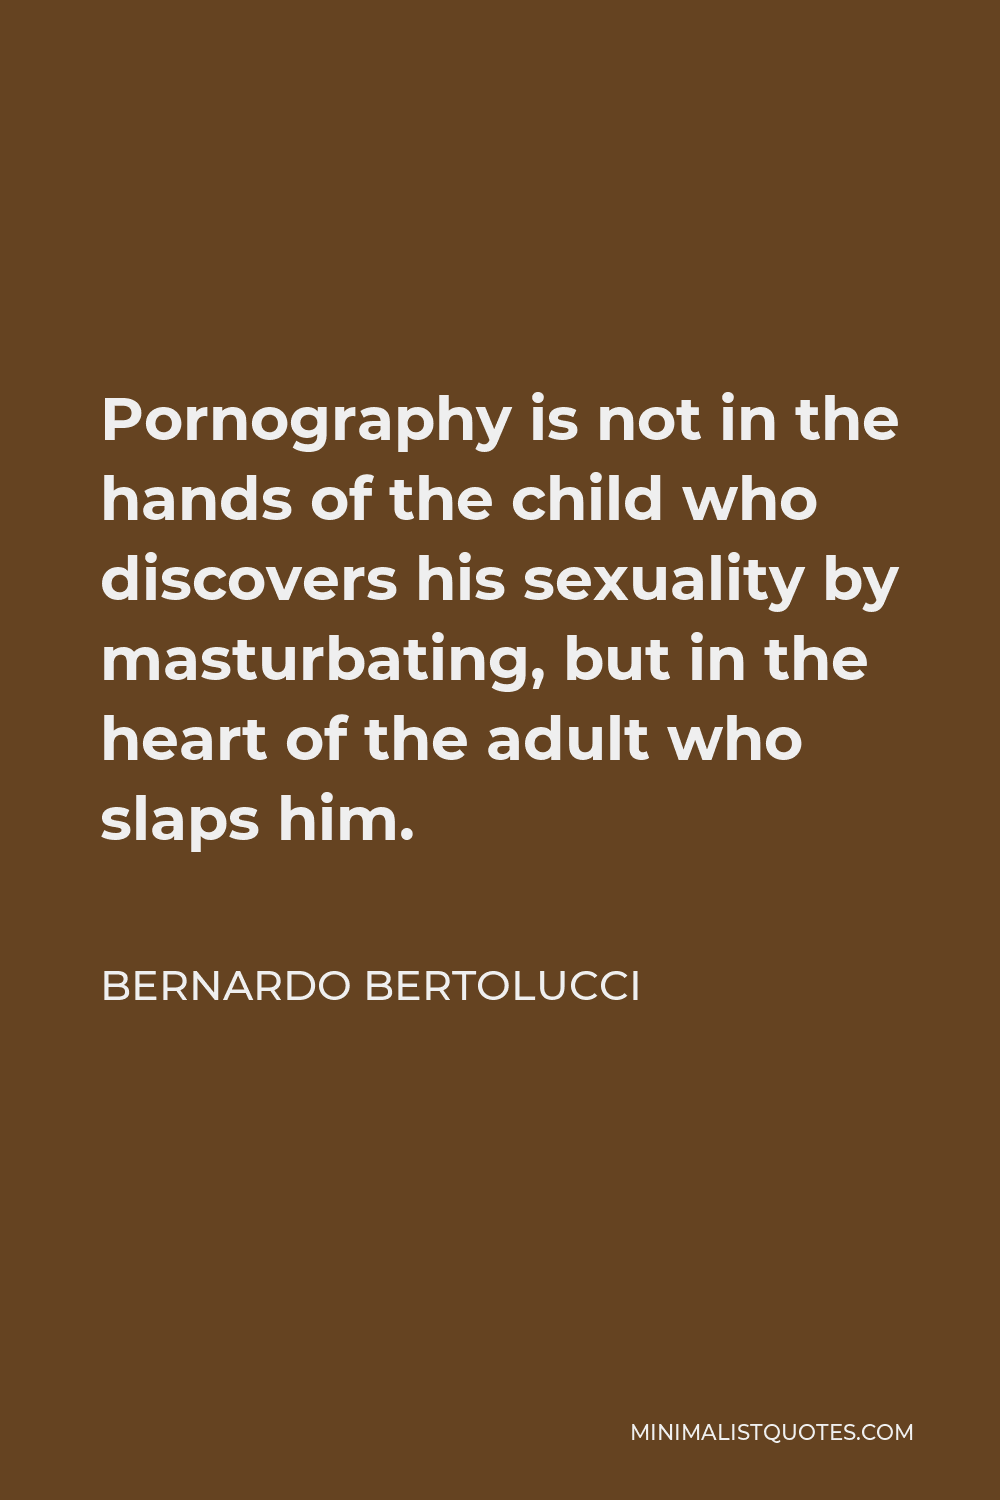 Bernardo Bertolucci Quote - Pornography is not in the hands of the child who discovers his sexuality by masturbating, but in the heart of the adult who slaps him.